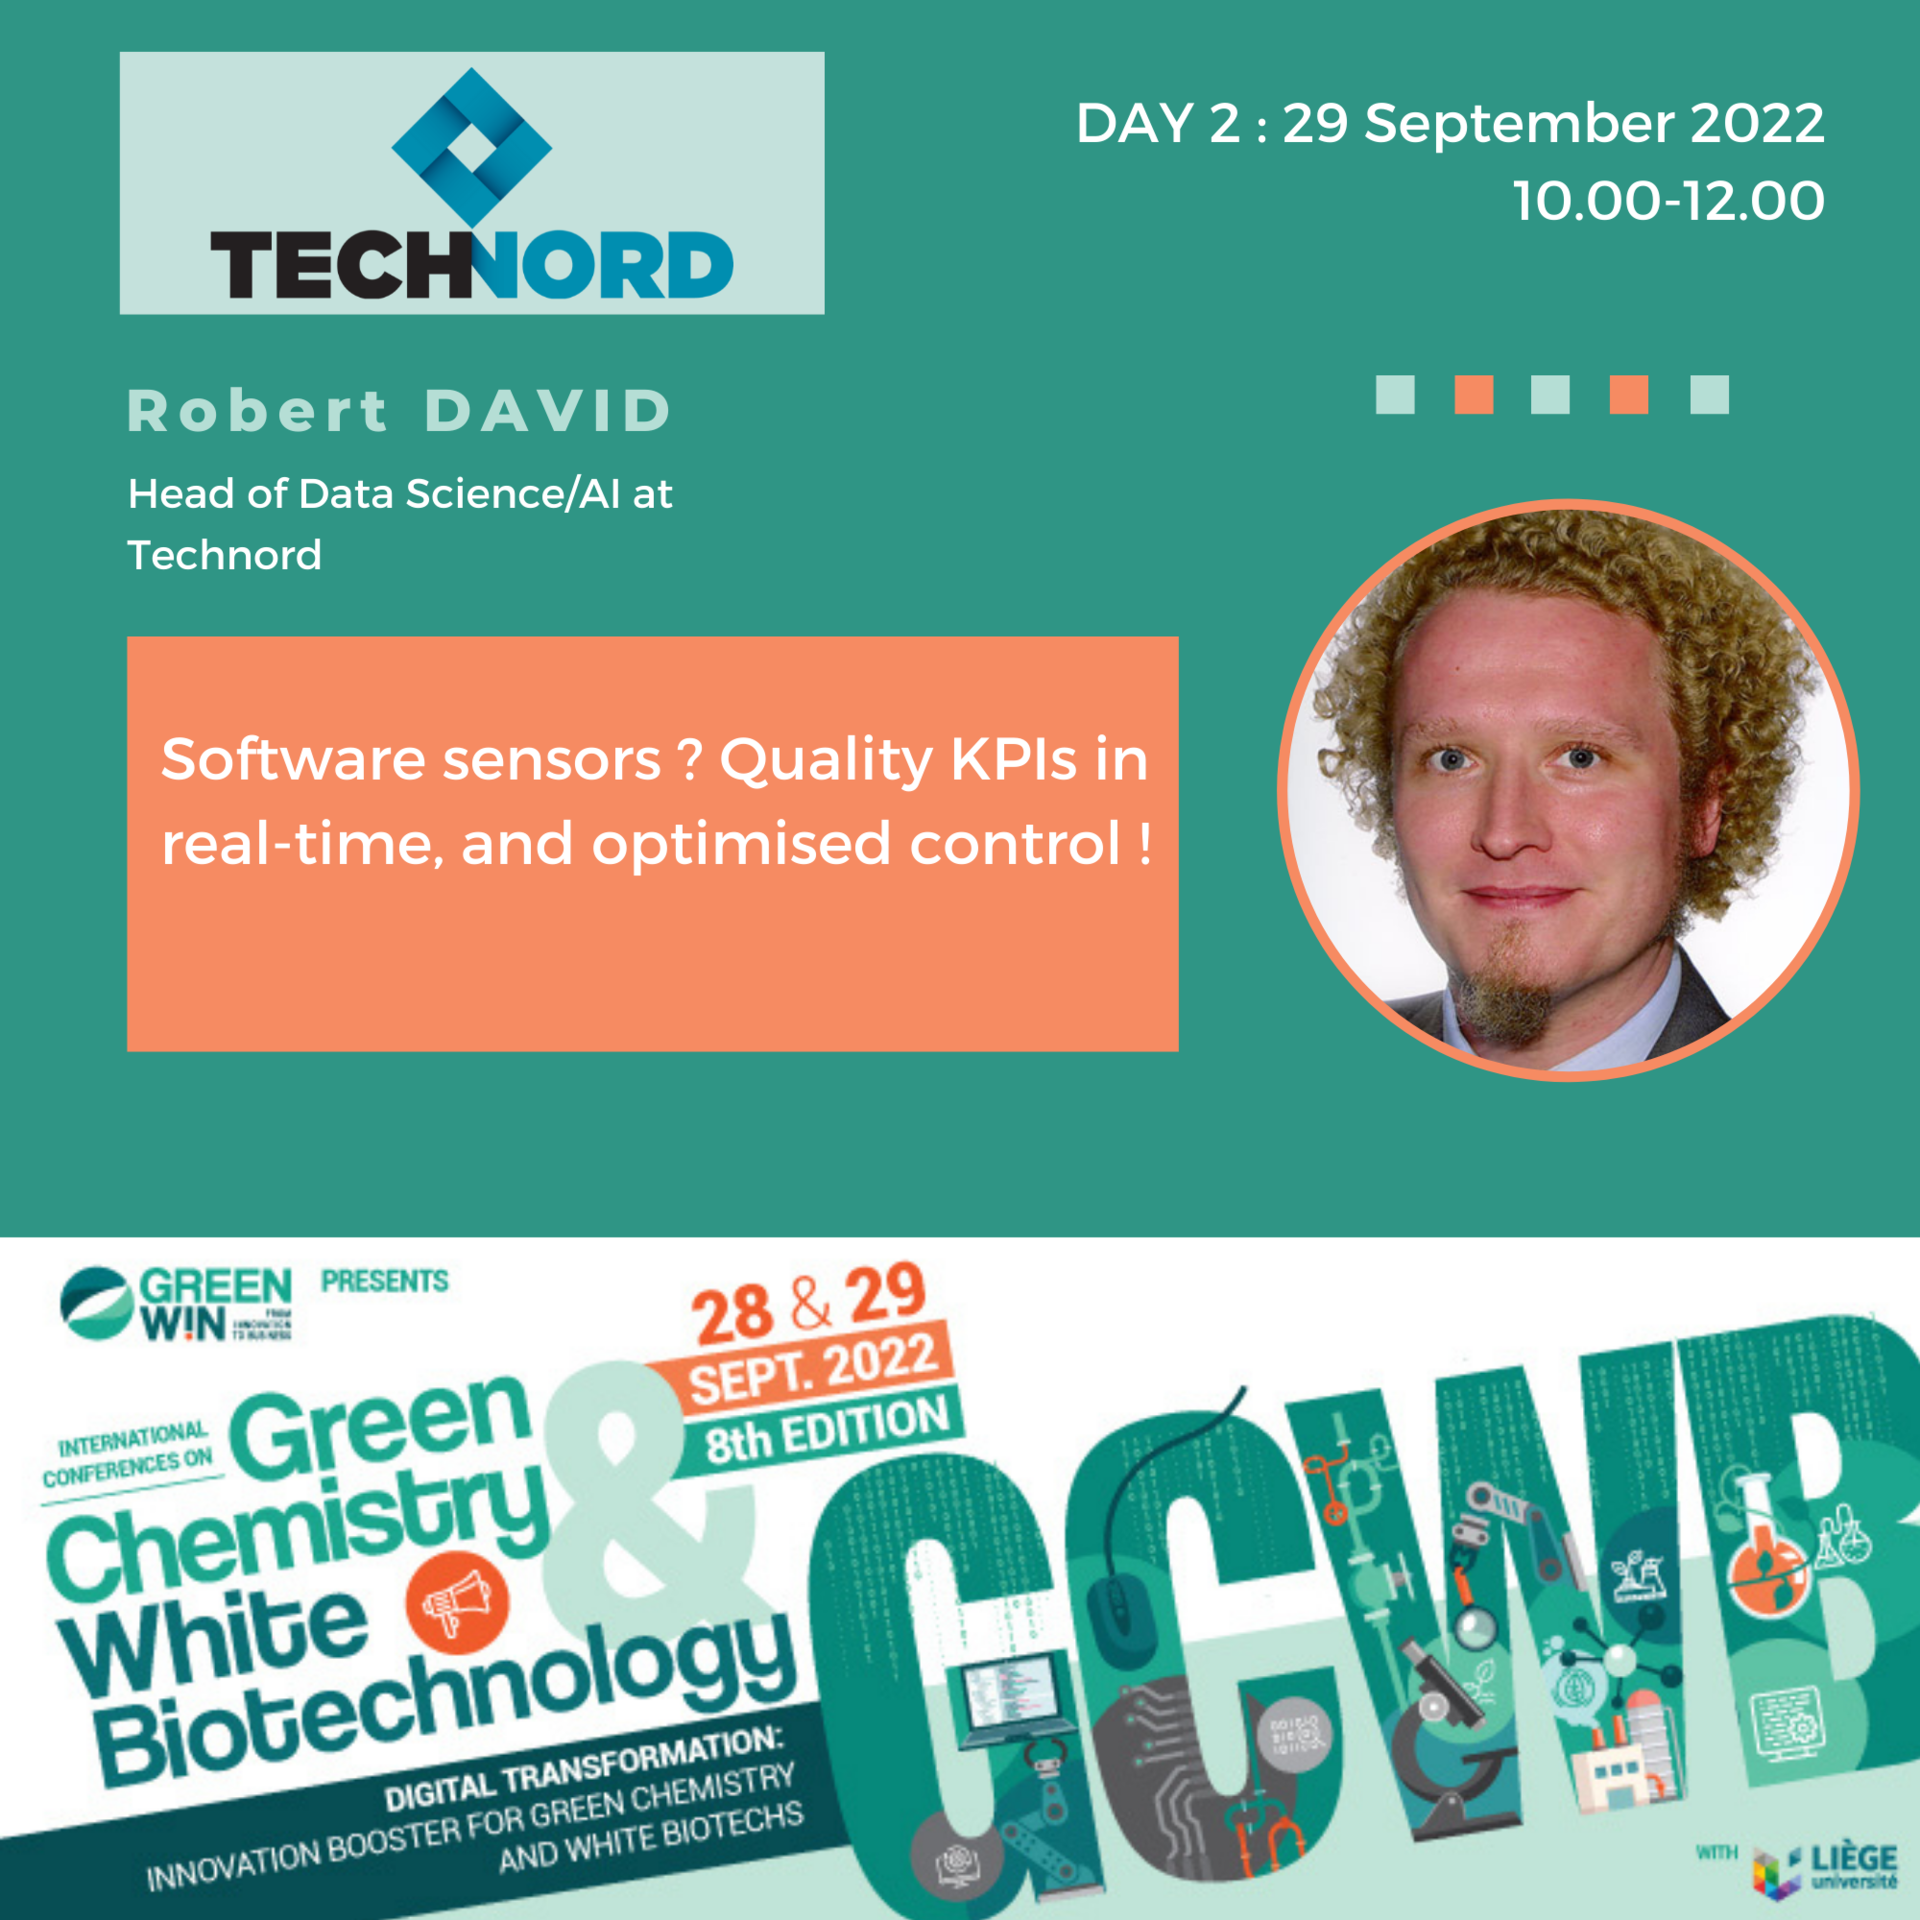 Dig the gold hidden in your data silos by contextualising your production with Robert DAVID, PhD  from Technord at the 8th edition of GreenWin's International Conference on Green Chemistry & White Biotech